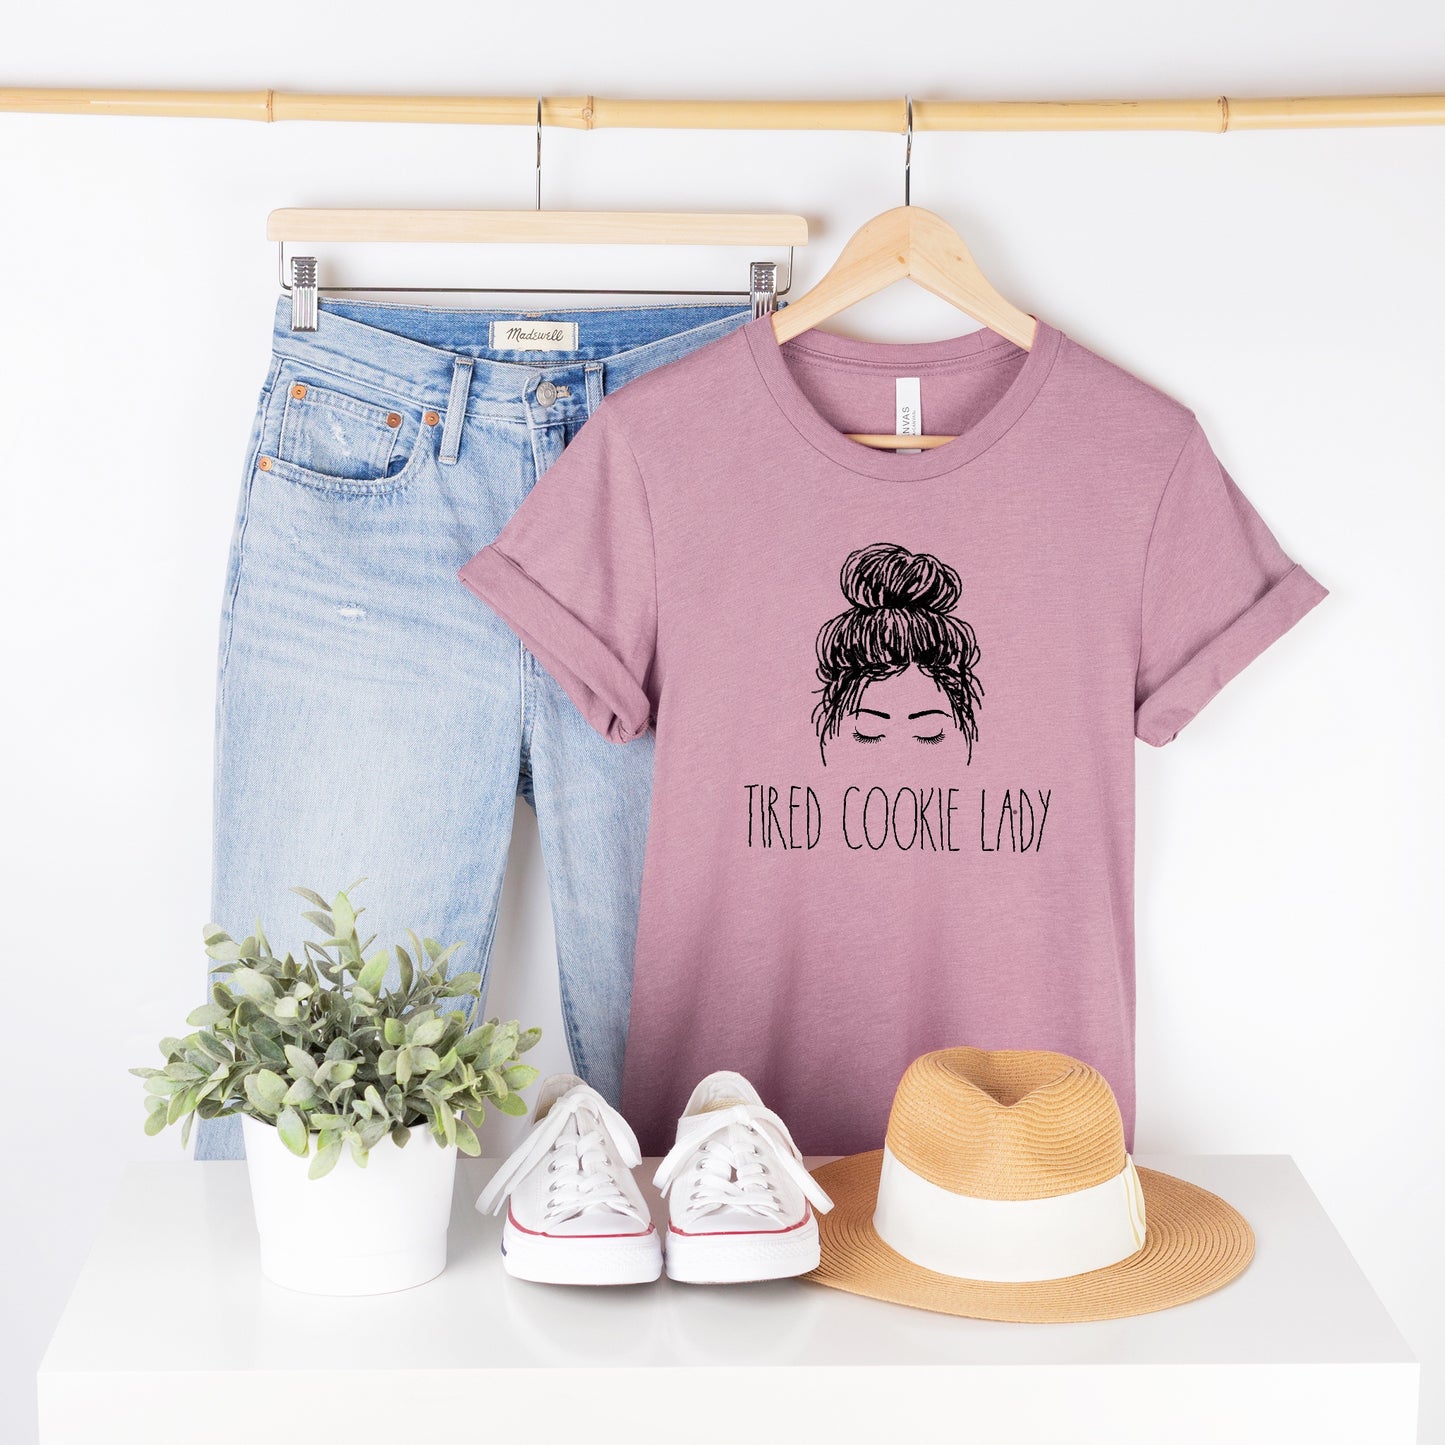 Tired Cookie Lady - Unisex Tee